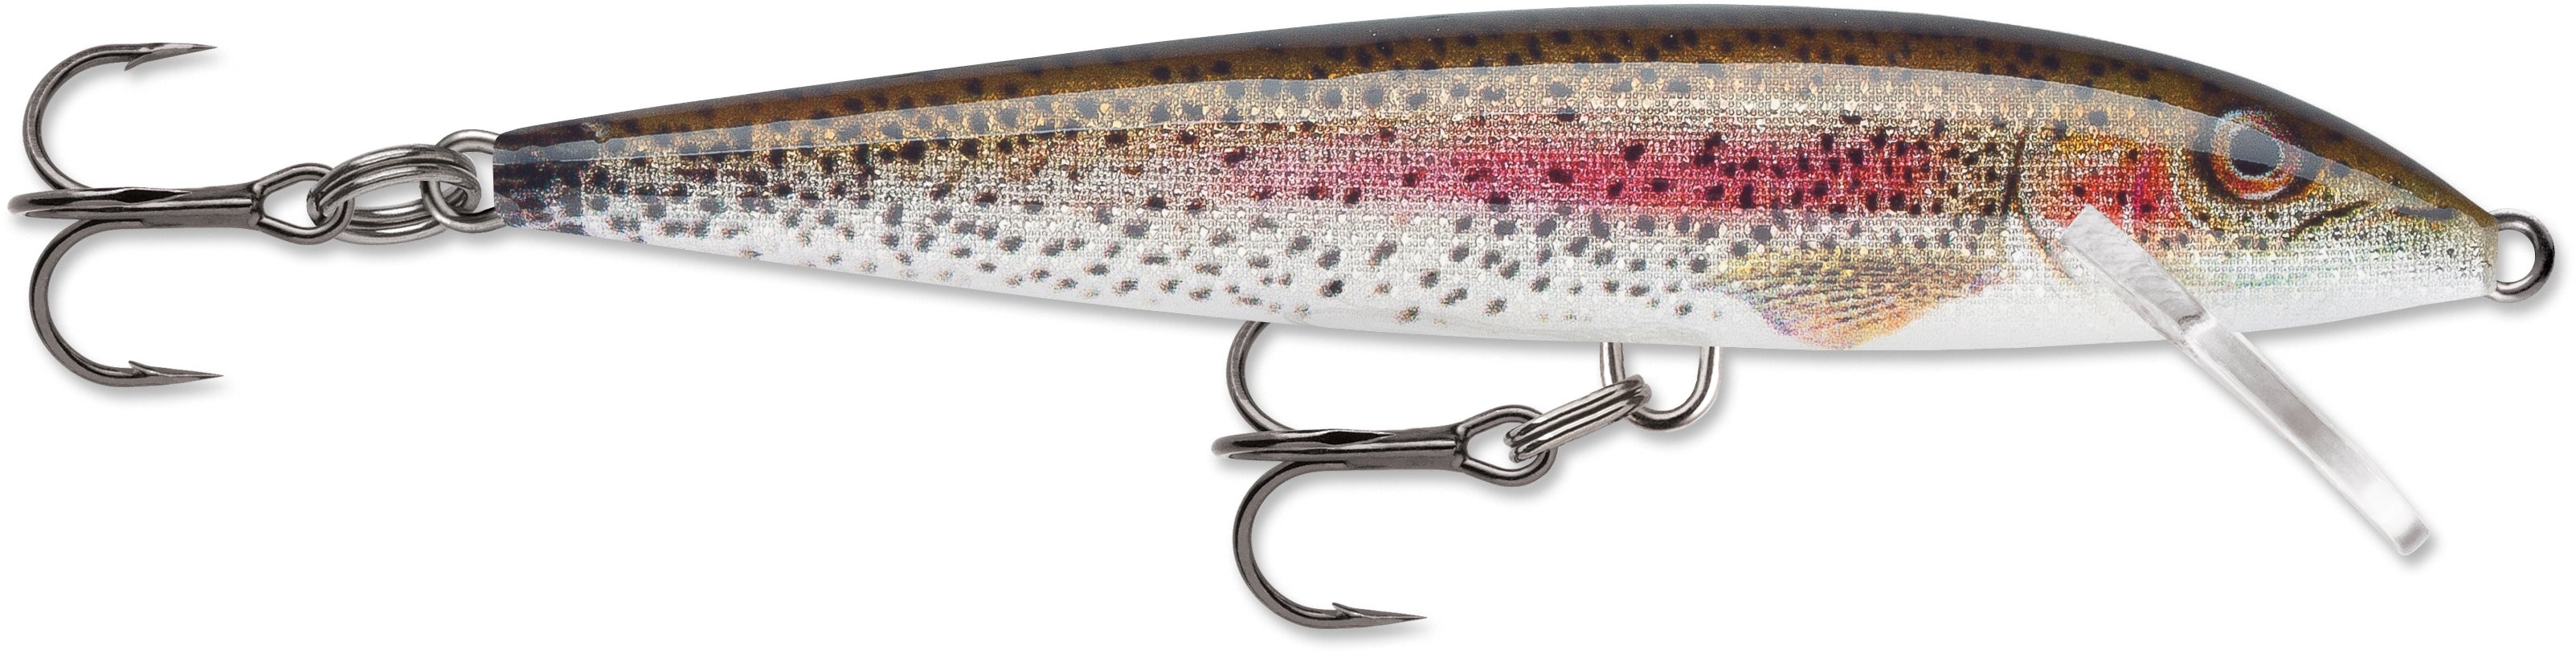 RAPALA FLOATING 9 cm 5 gr F-09 COL. RAINBOW TROUT FIUME TROUT AREA